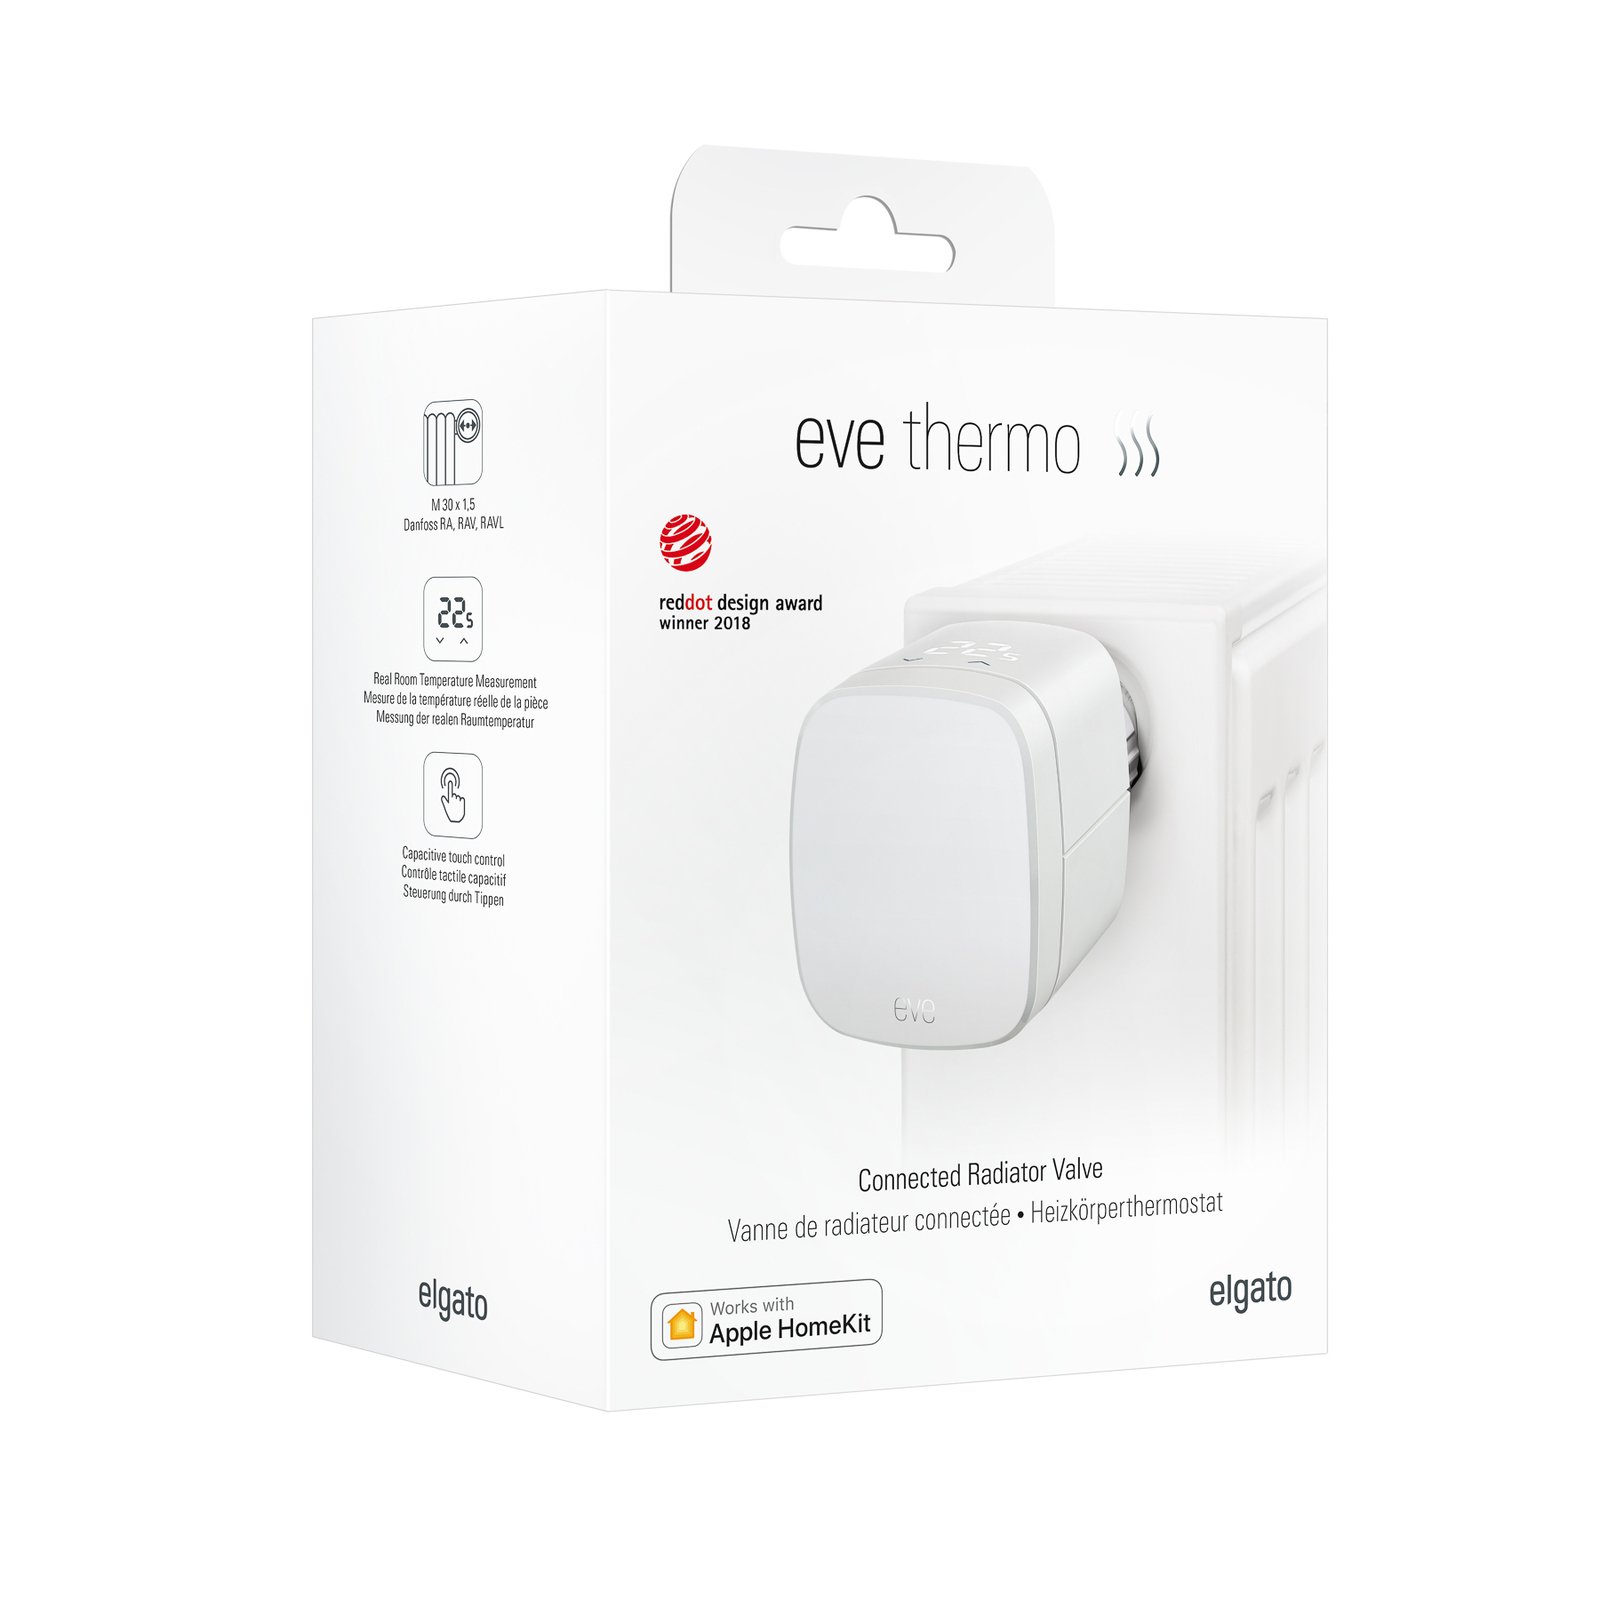 Eve Thermo Smart Home radiatorthermostaat